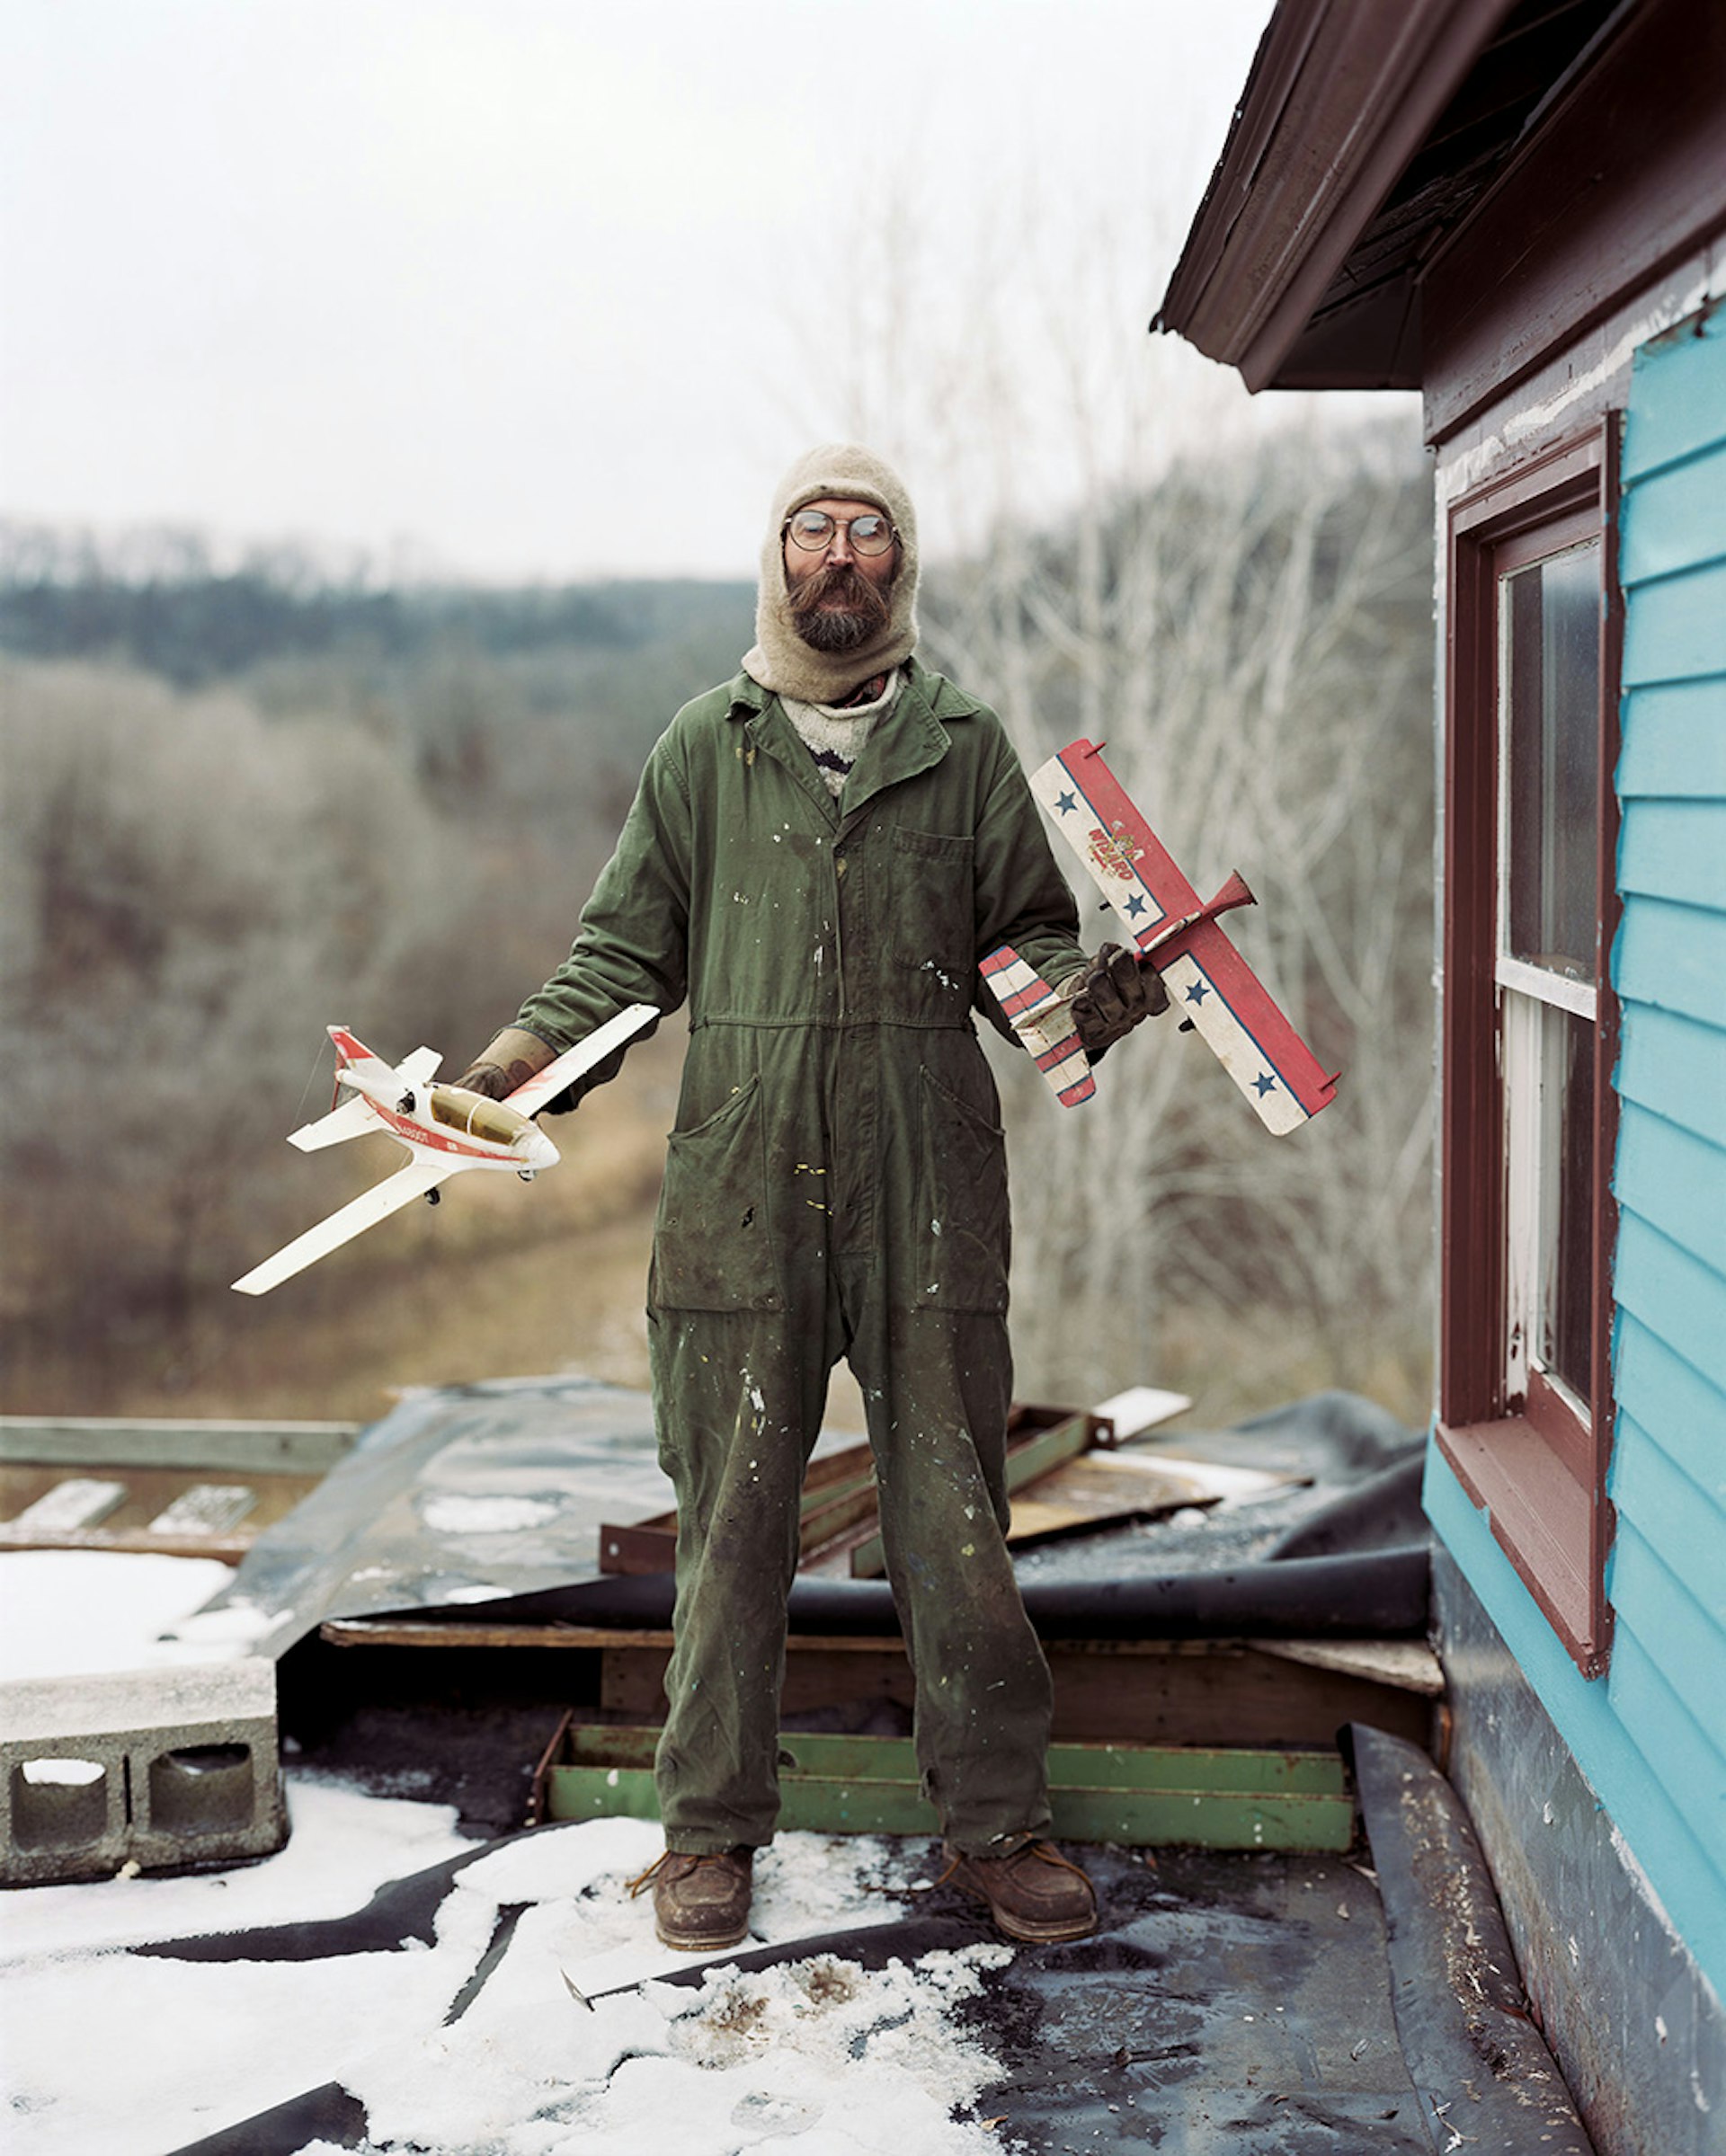 Alec Soth, ‘Charles, Vasa, Minnesota’ from ‘Sleeping by the Mississippi’, 2017 © Courtesy of the artist and MACK Books, work exhibited by: MACK